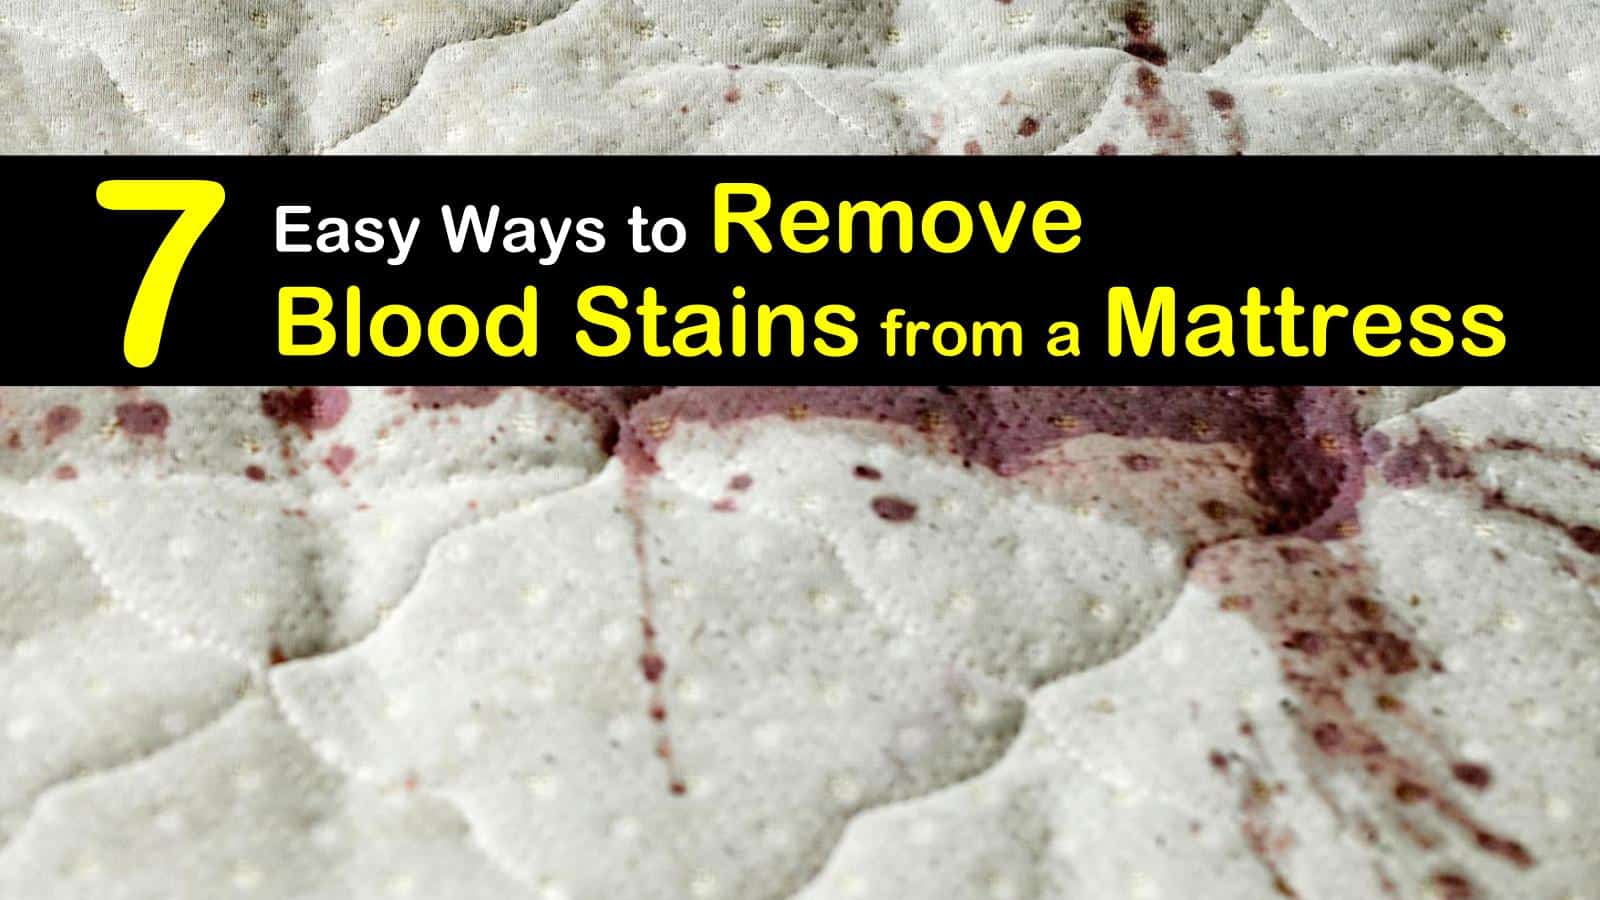 How to Remove Blood Stains from Mattress With Baking Soda Without